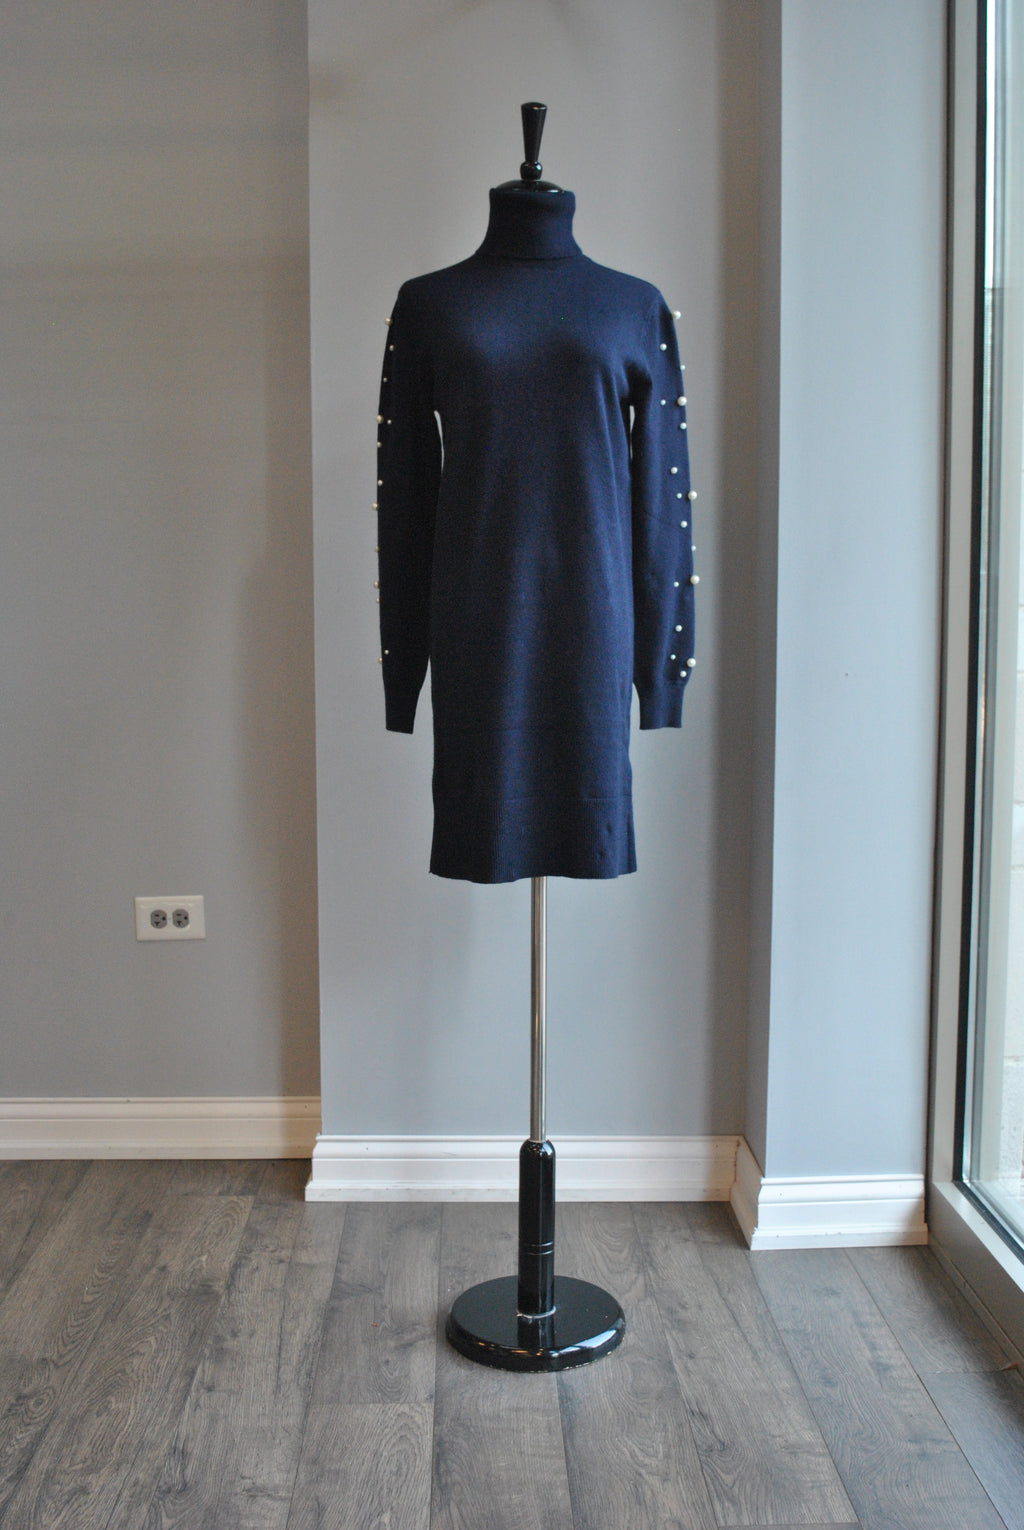 NAVY BLUE TURTLENCK STYLE SWEATER TUNIC WITH PEARL DETAILS